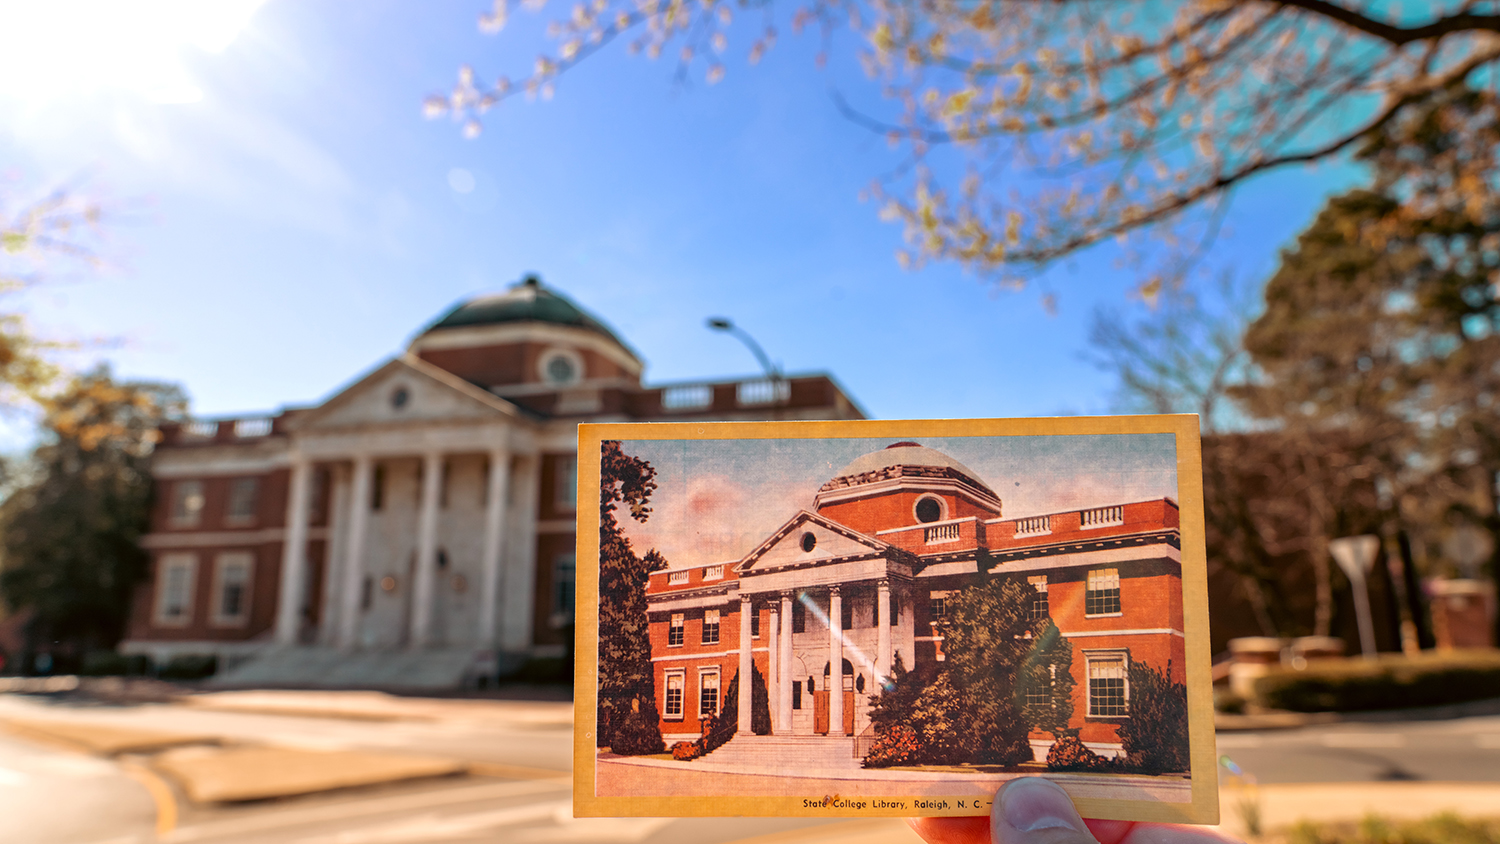 Brooks Hall at NC State's College of Design, with an old postcard depicting the building during the 1920s.